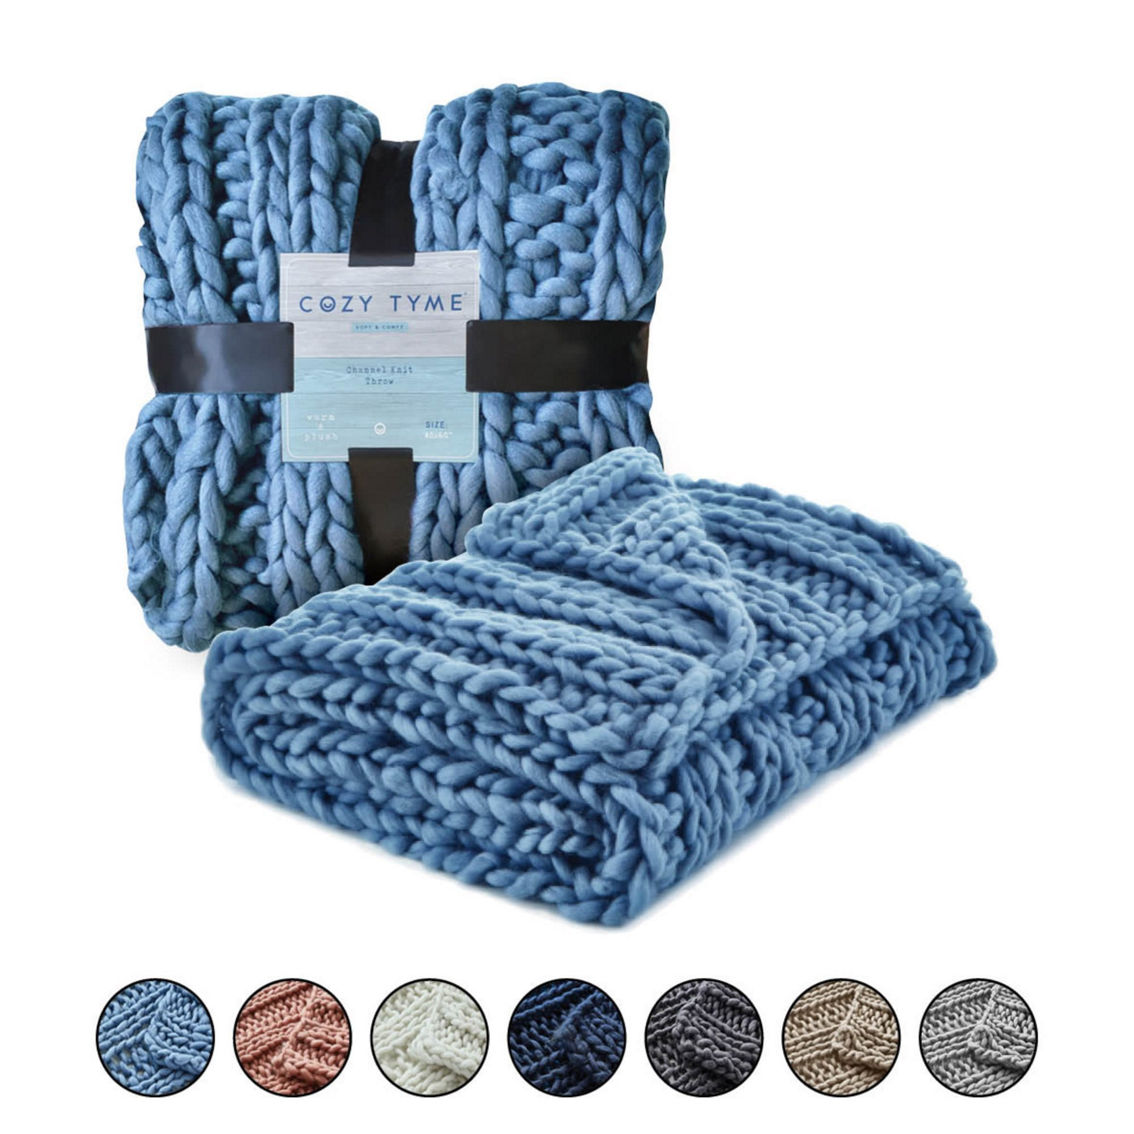 Cozy Tyme Keon Channel Knit Throw - Image 5 of 5